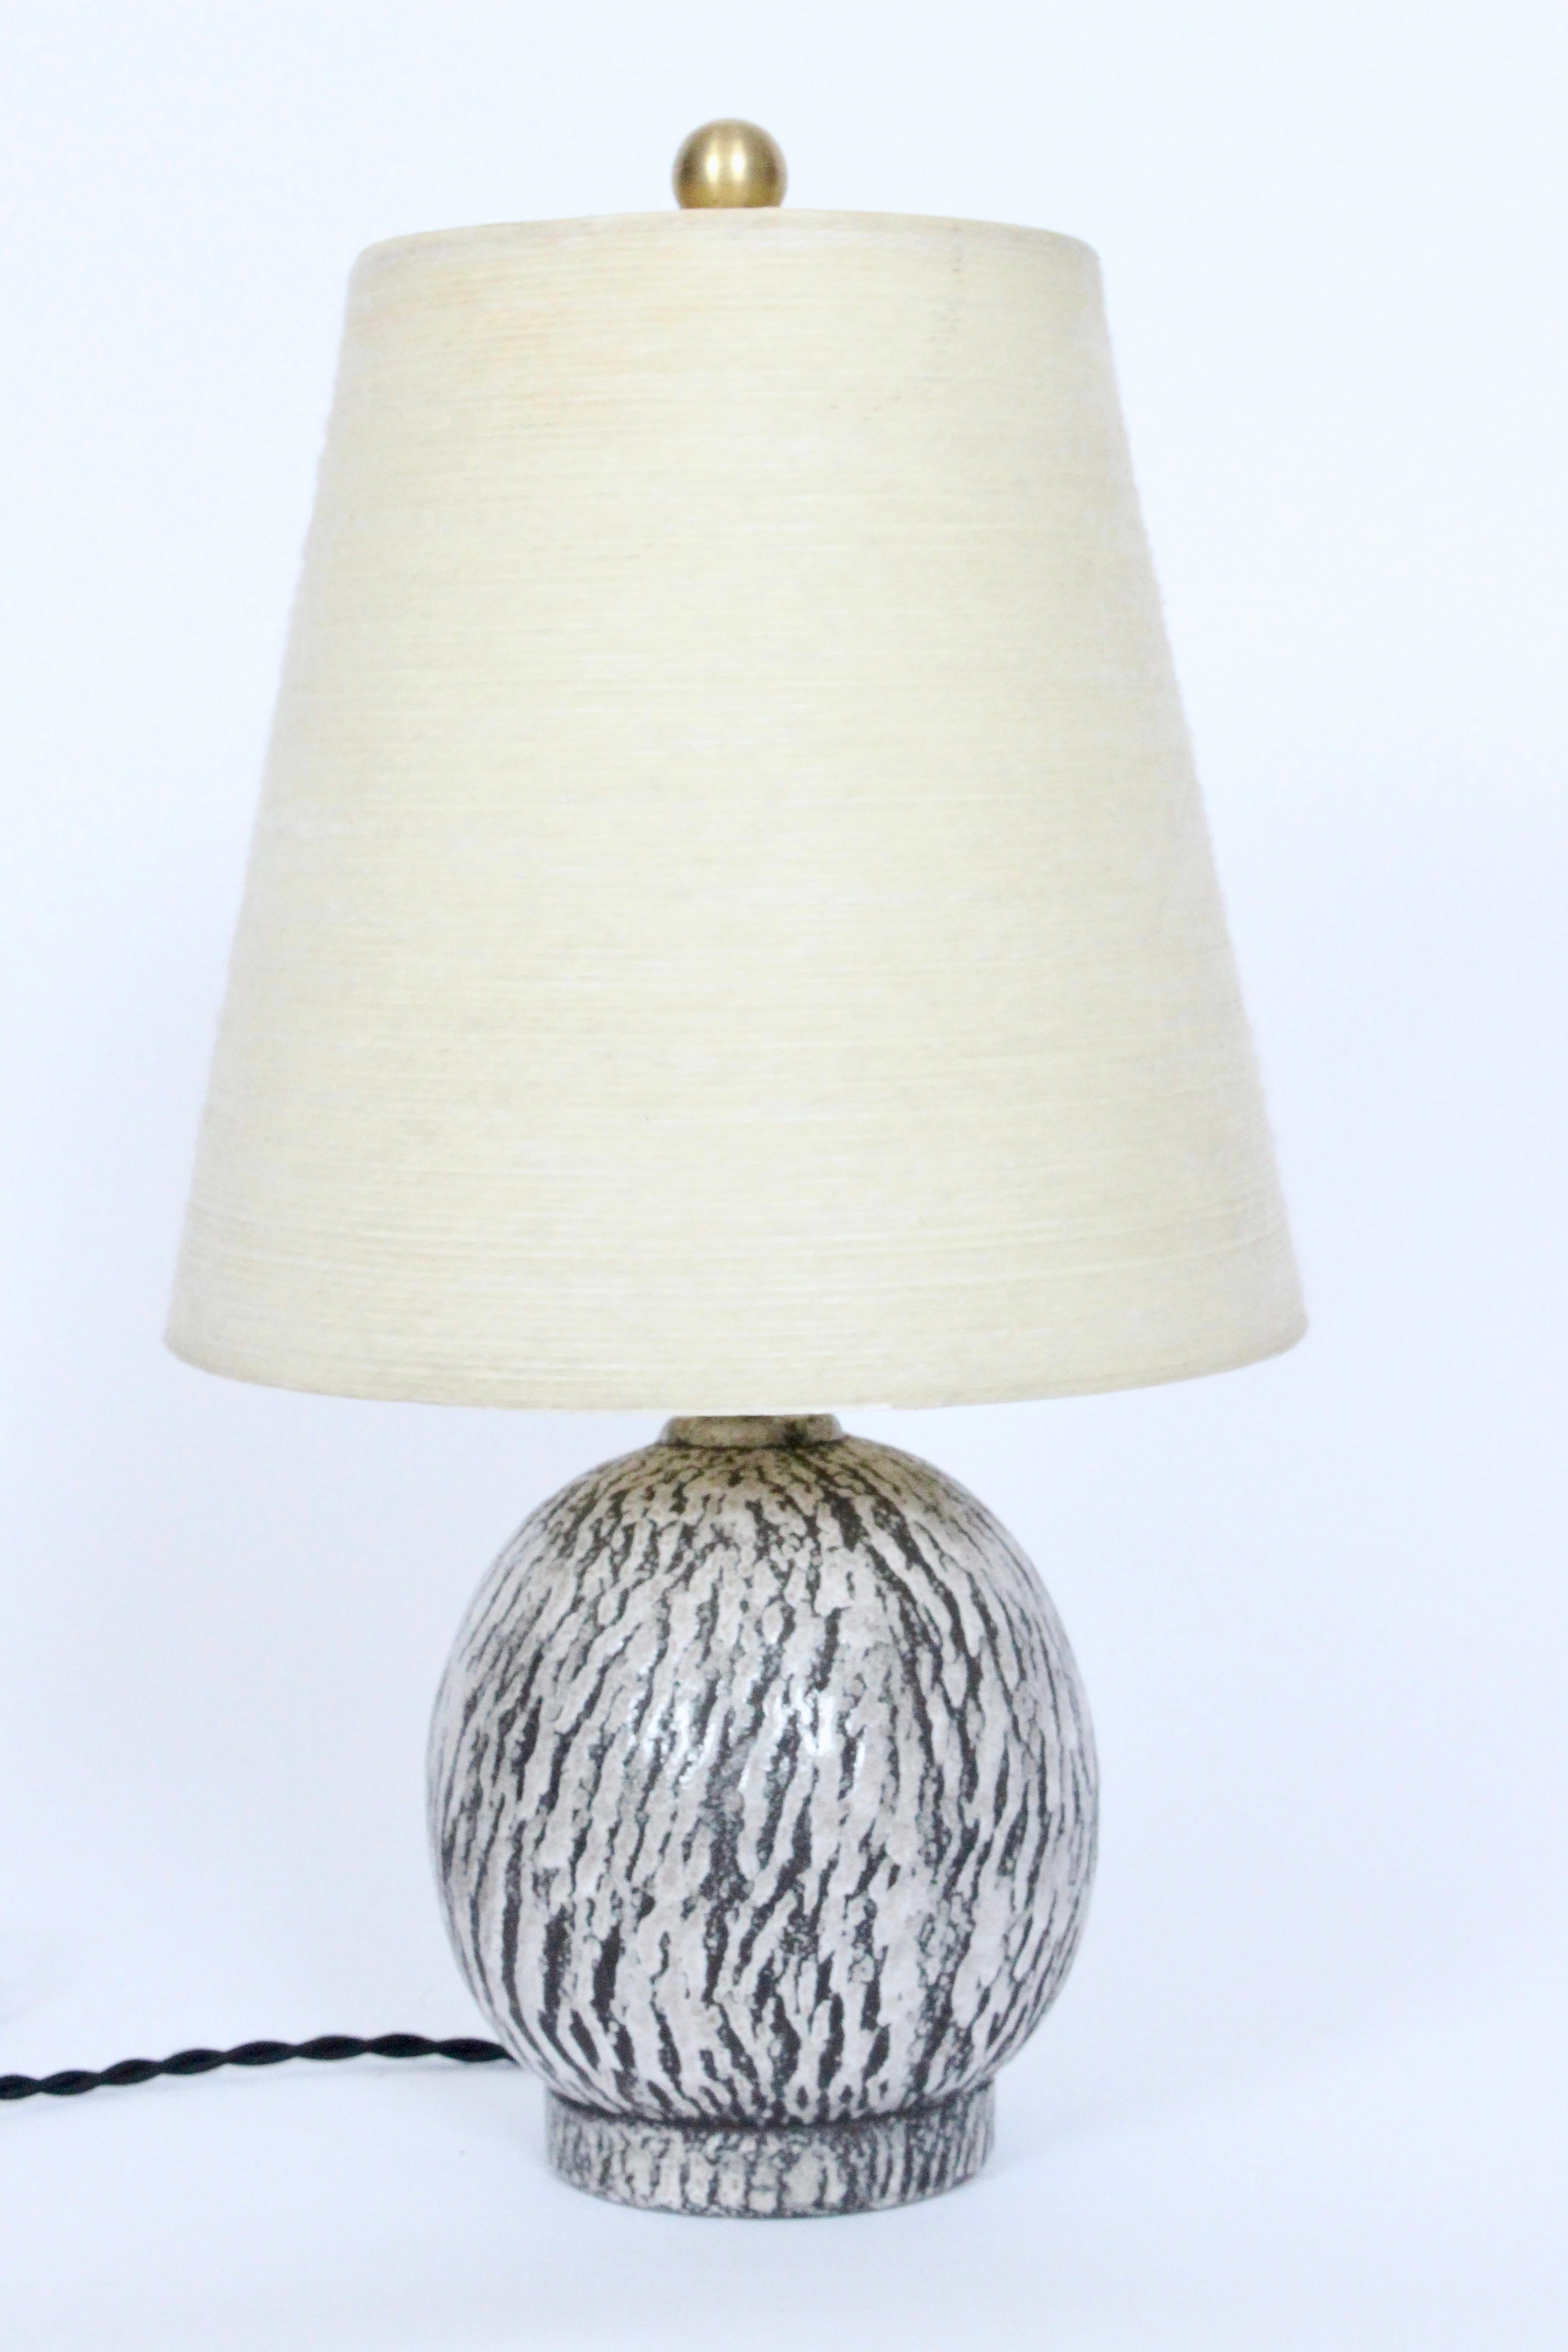 Mid-20th Century Petite Kelby White & Charcoal Drip Glaze Pottery Table Lamp, 1950's For Sale